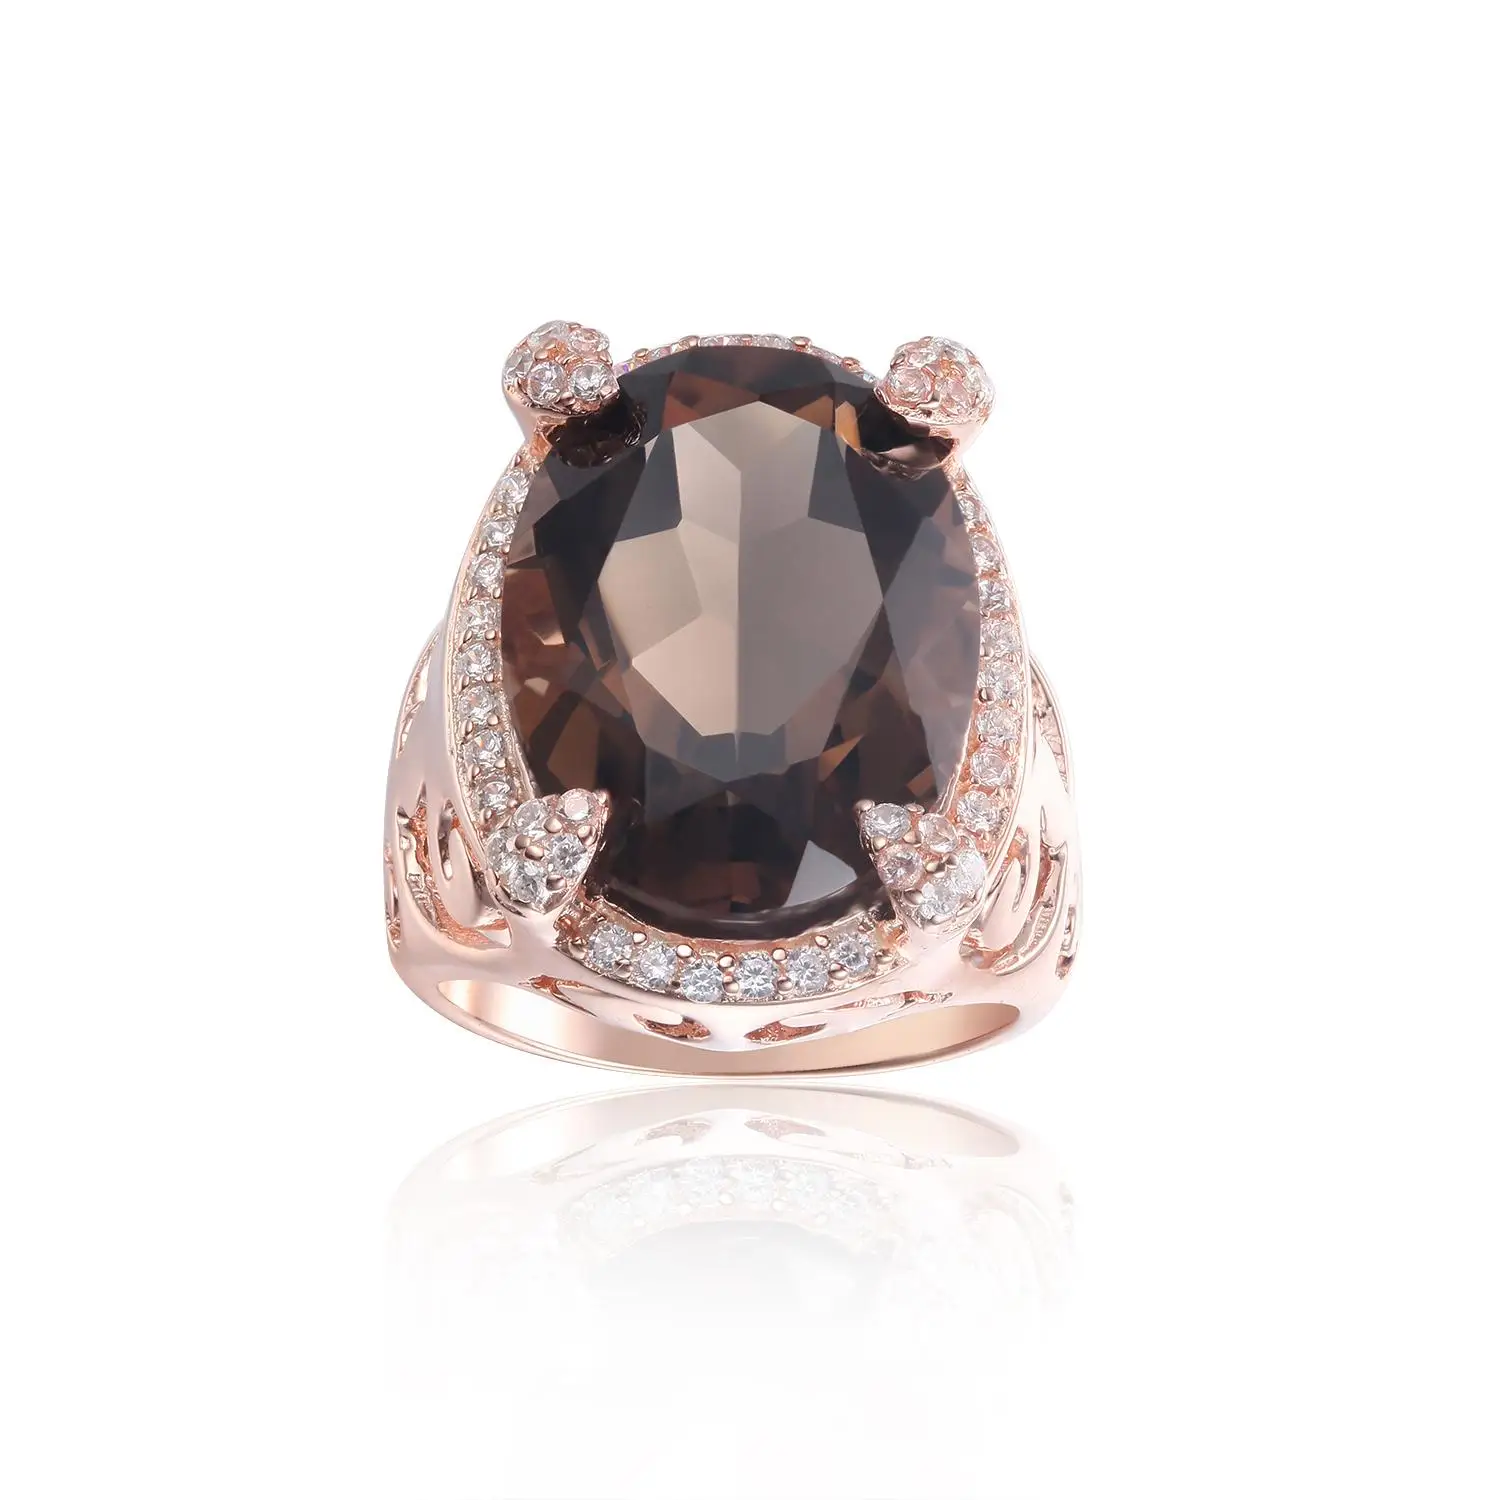 

Abiding Round Natural Smoky Quartz 925 Sterling Silver With Checkboard Cutting Ring Solitaire Bezel Setting Women Ring